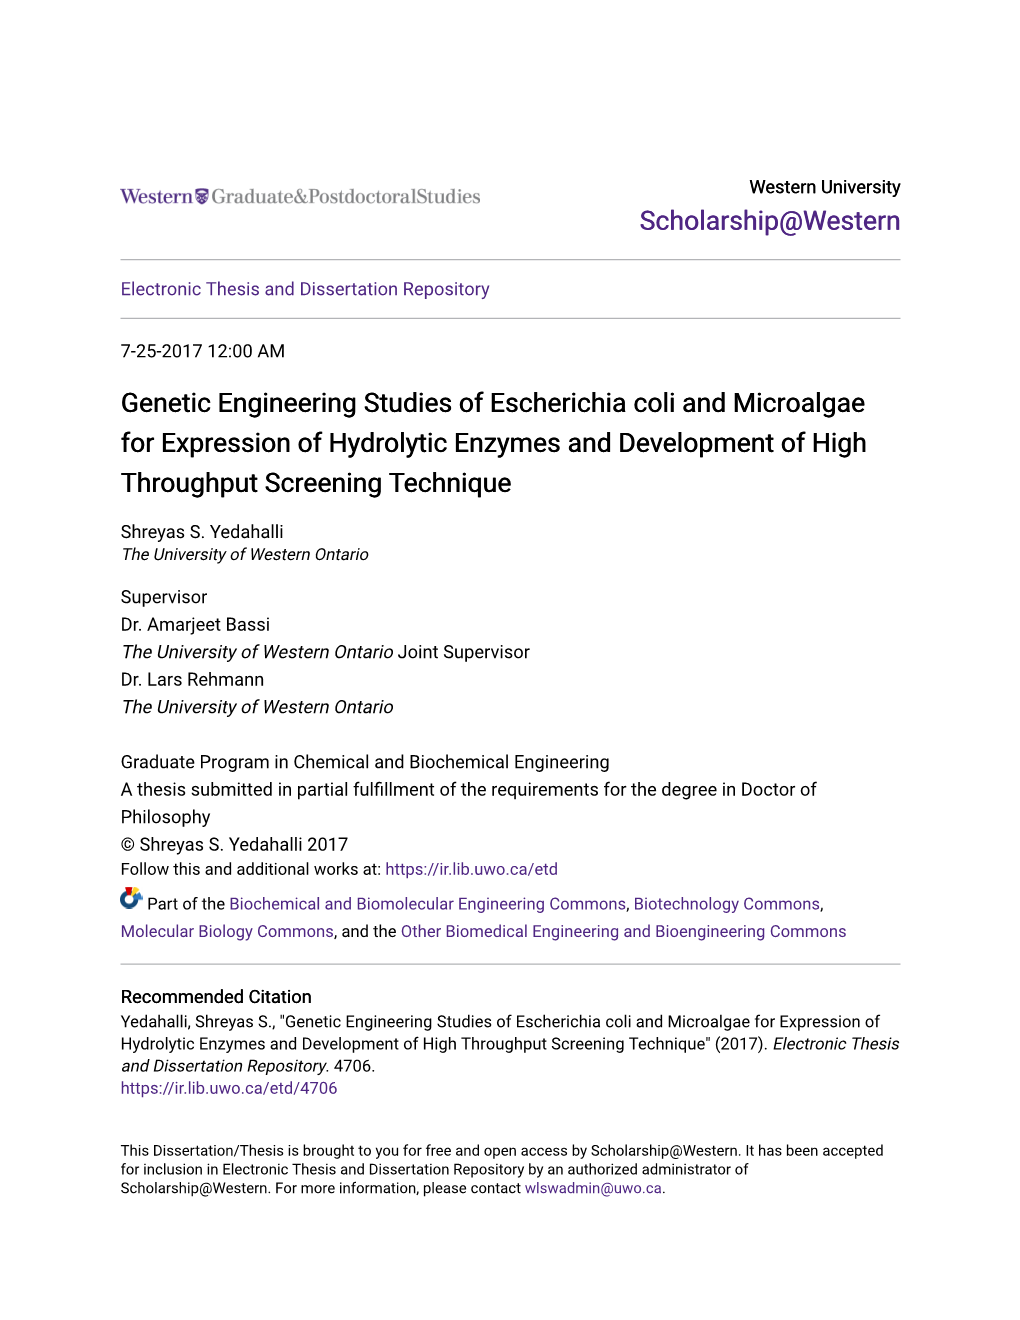 Genetic Engineering Studies of Escherichia Coli and Microalgae for Expression of Hydrolytic Enzymes and Development of High Throughput Screening Technique